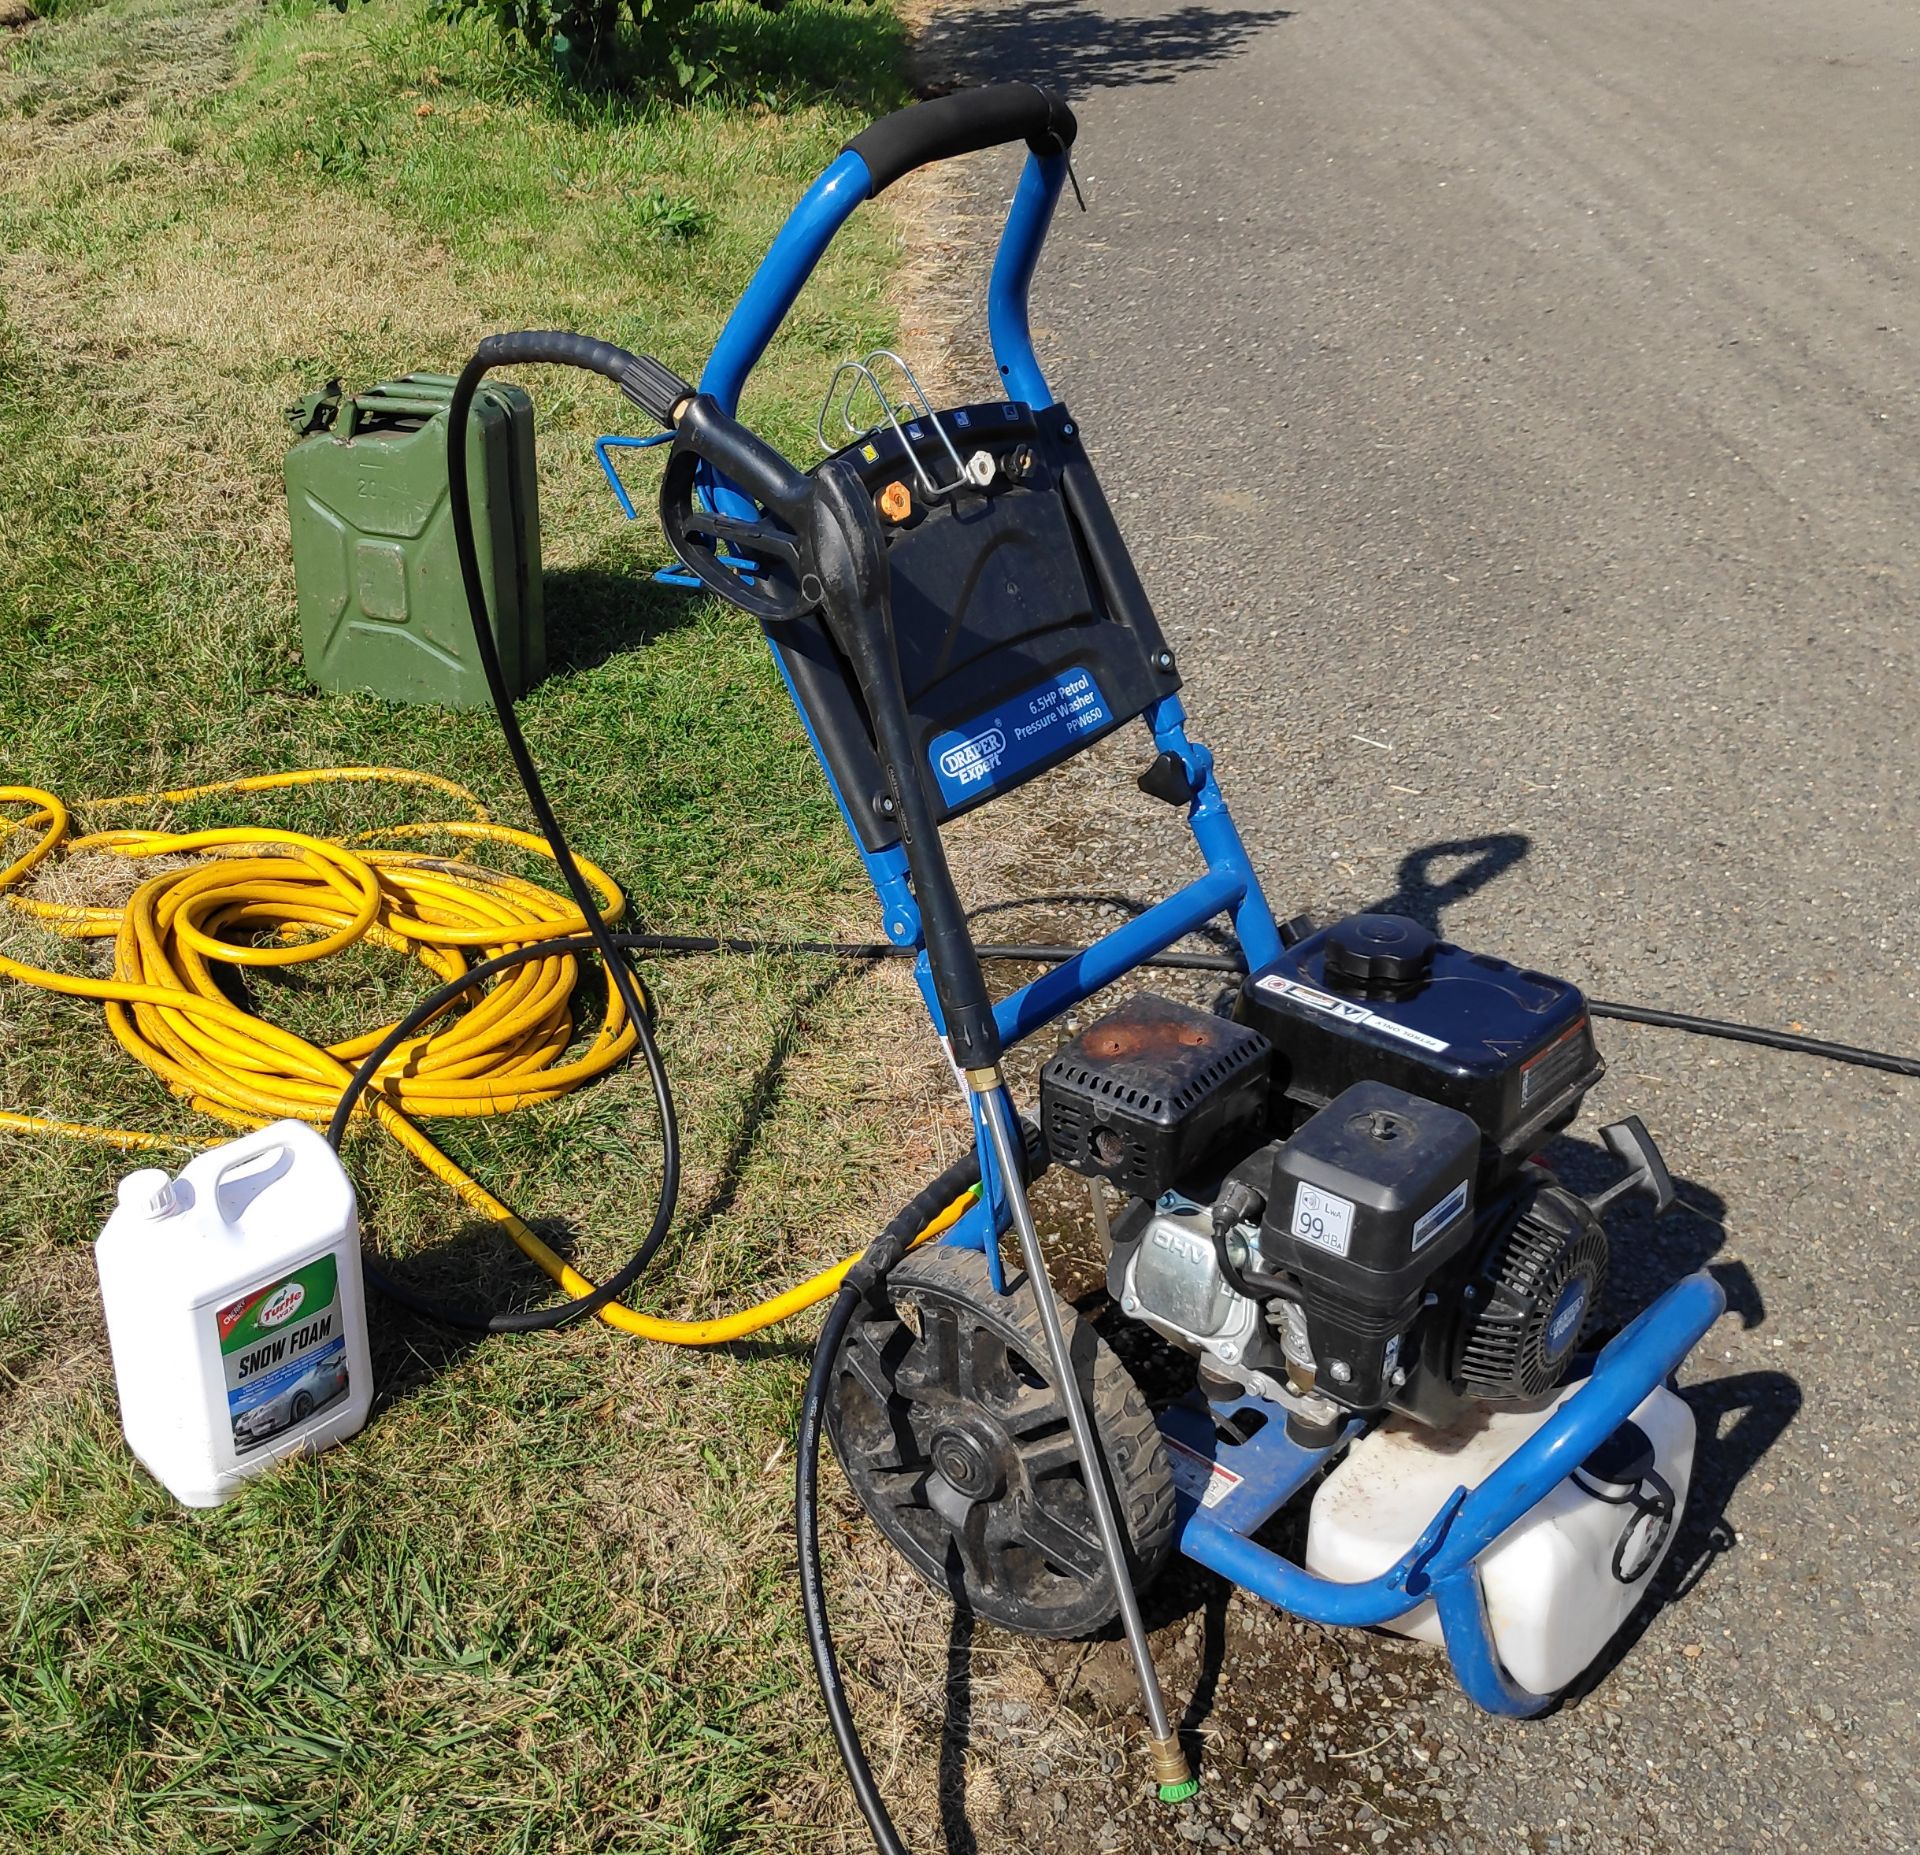 1 x Draper Expert 6.5Hp Petrol Pressure Washer PPW650 - CL011 - Location: Corby, Northamptonshire - Image 6 of 10